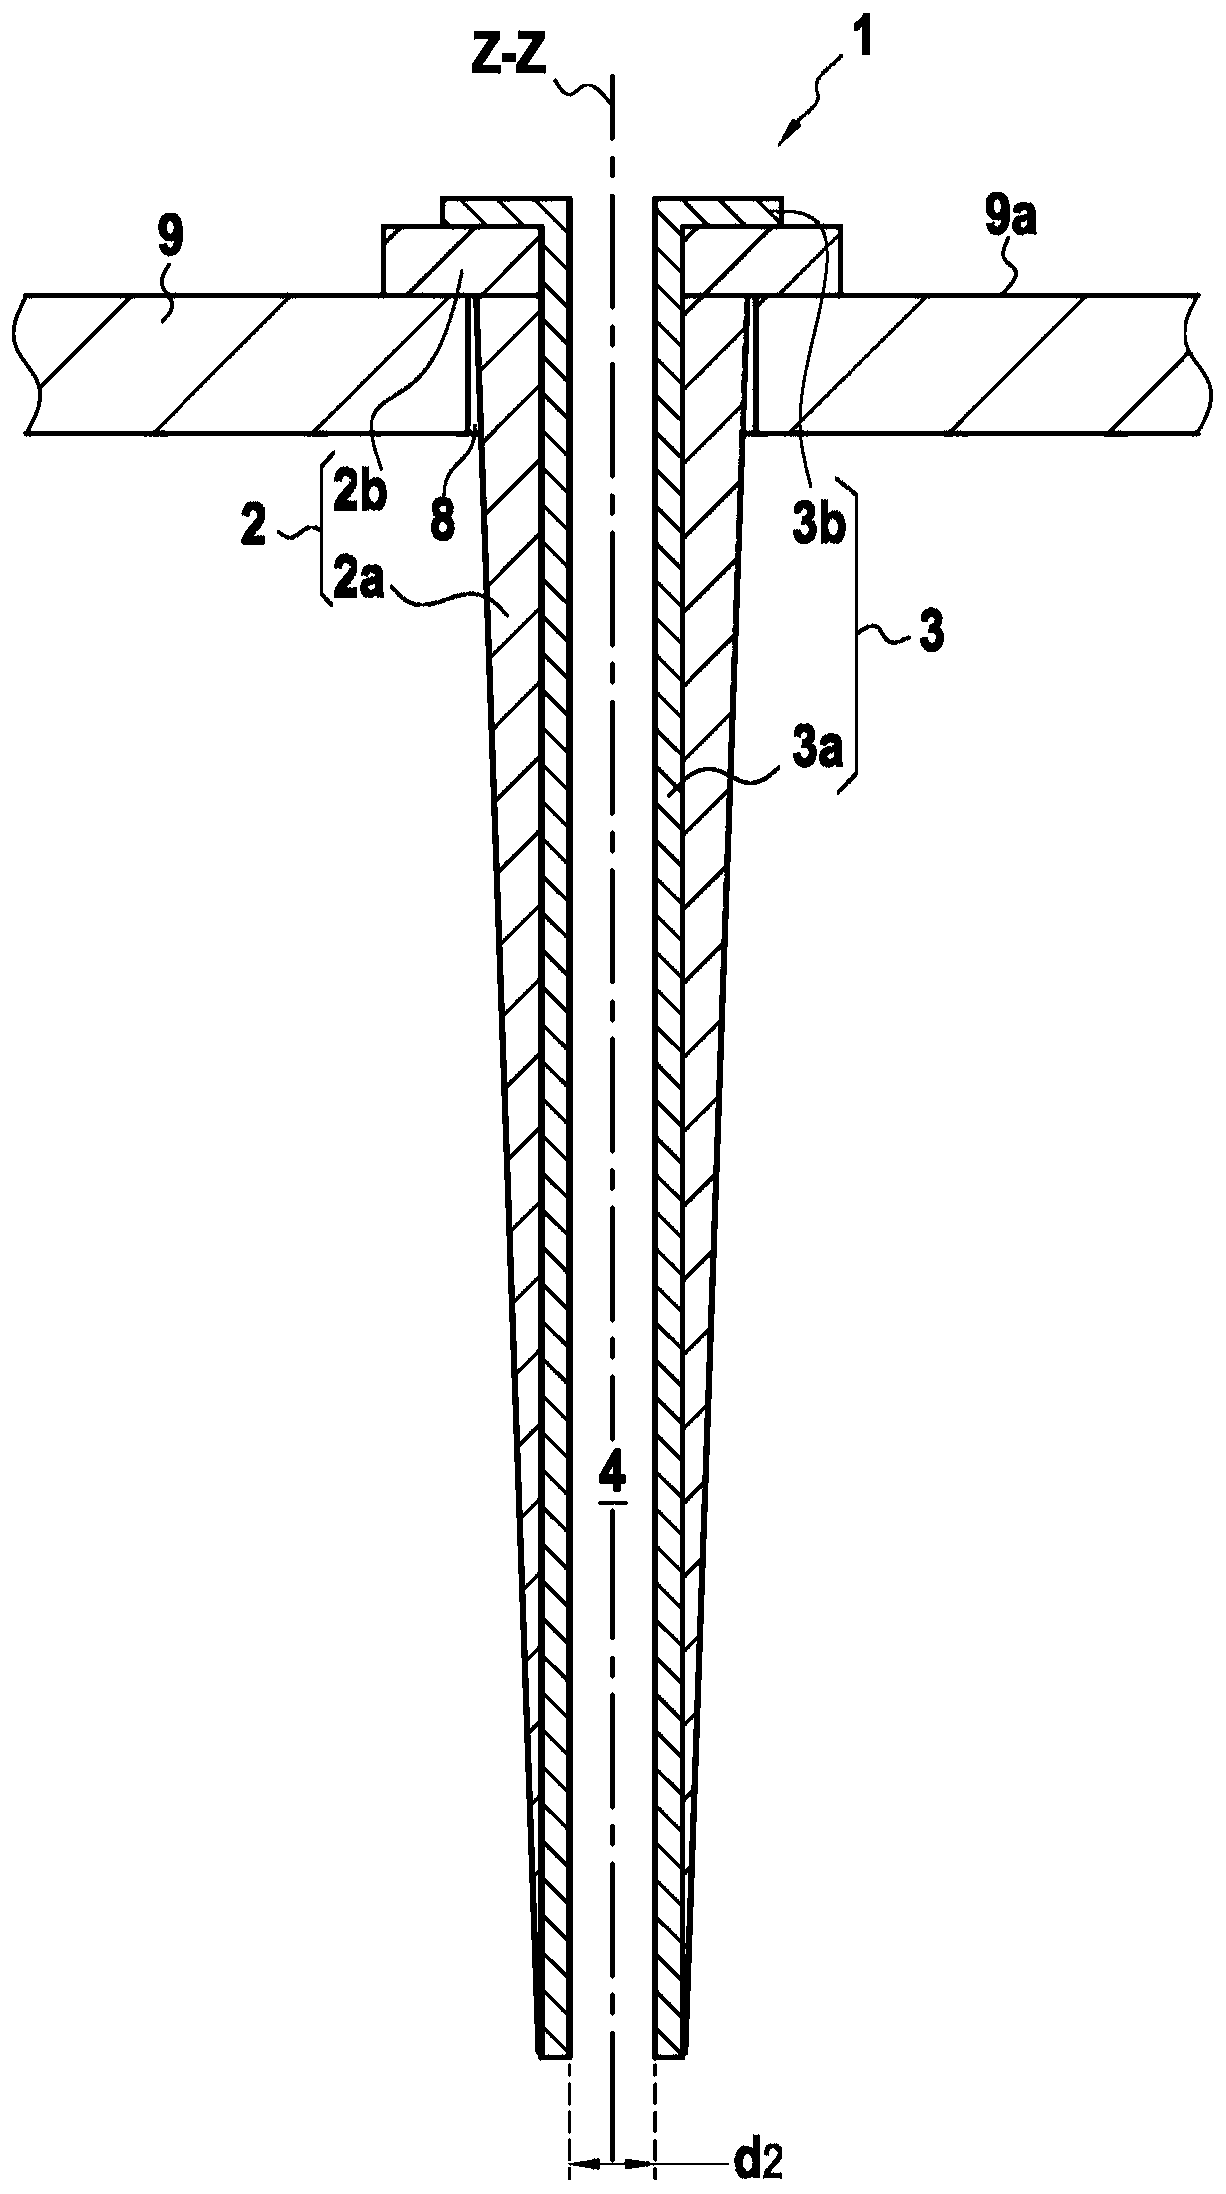 Methods of installing and implementing rigid pipes from vessels or floating supports